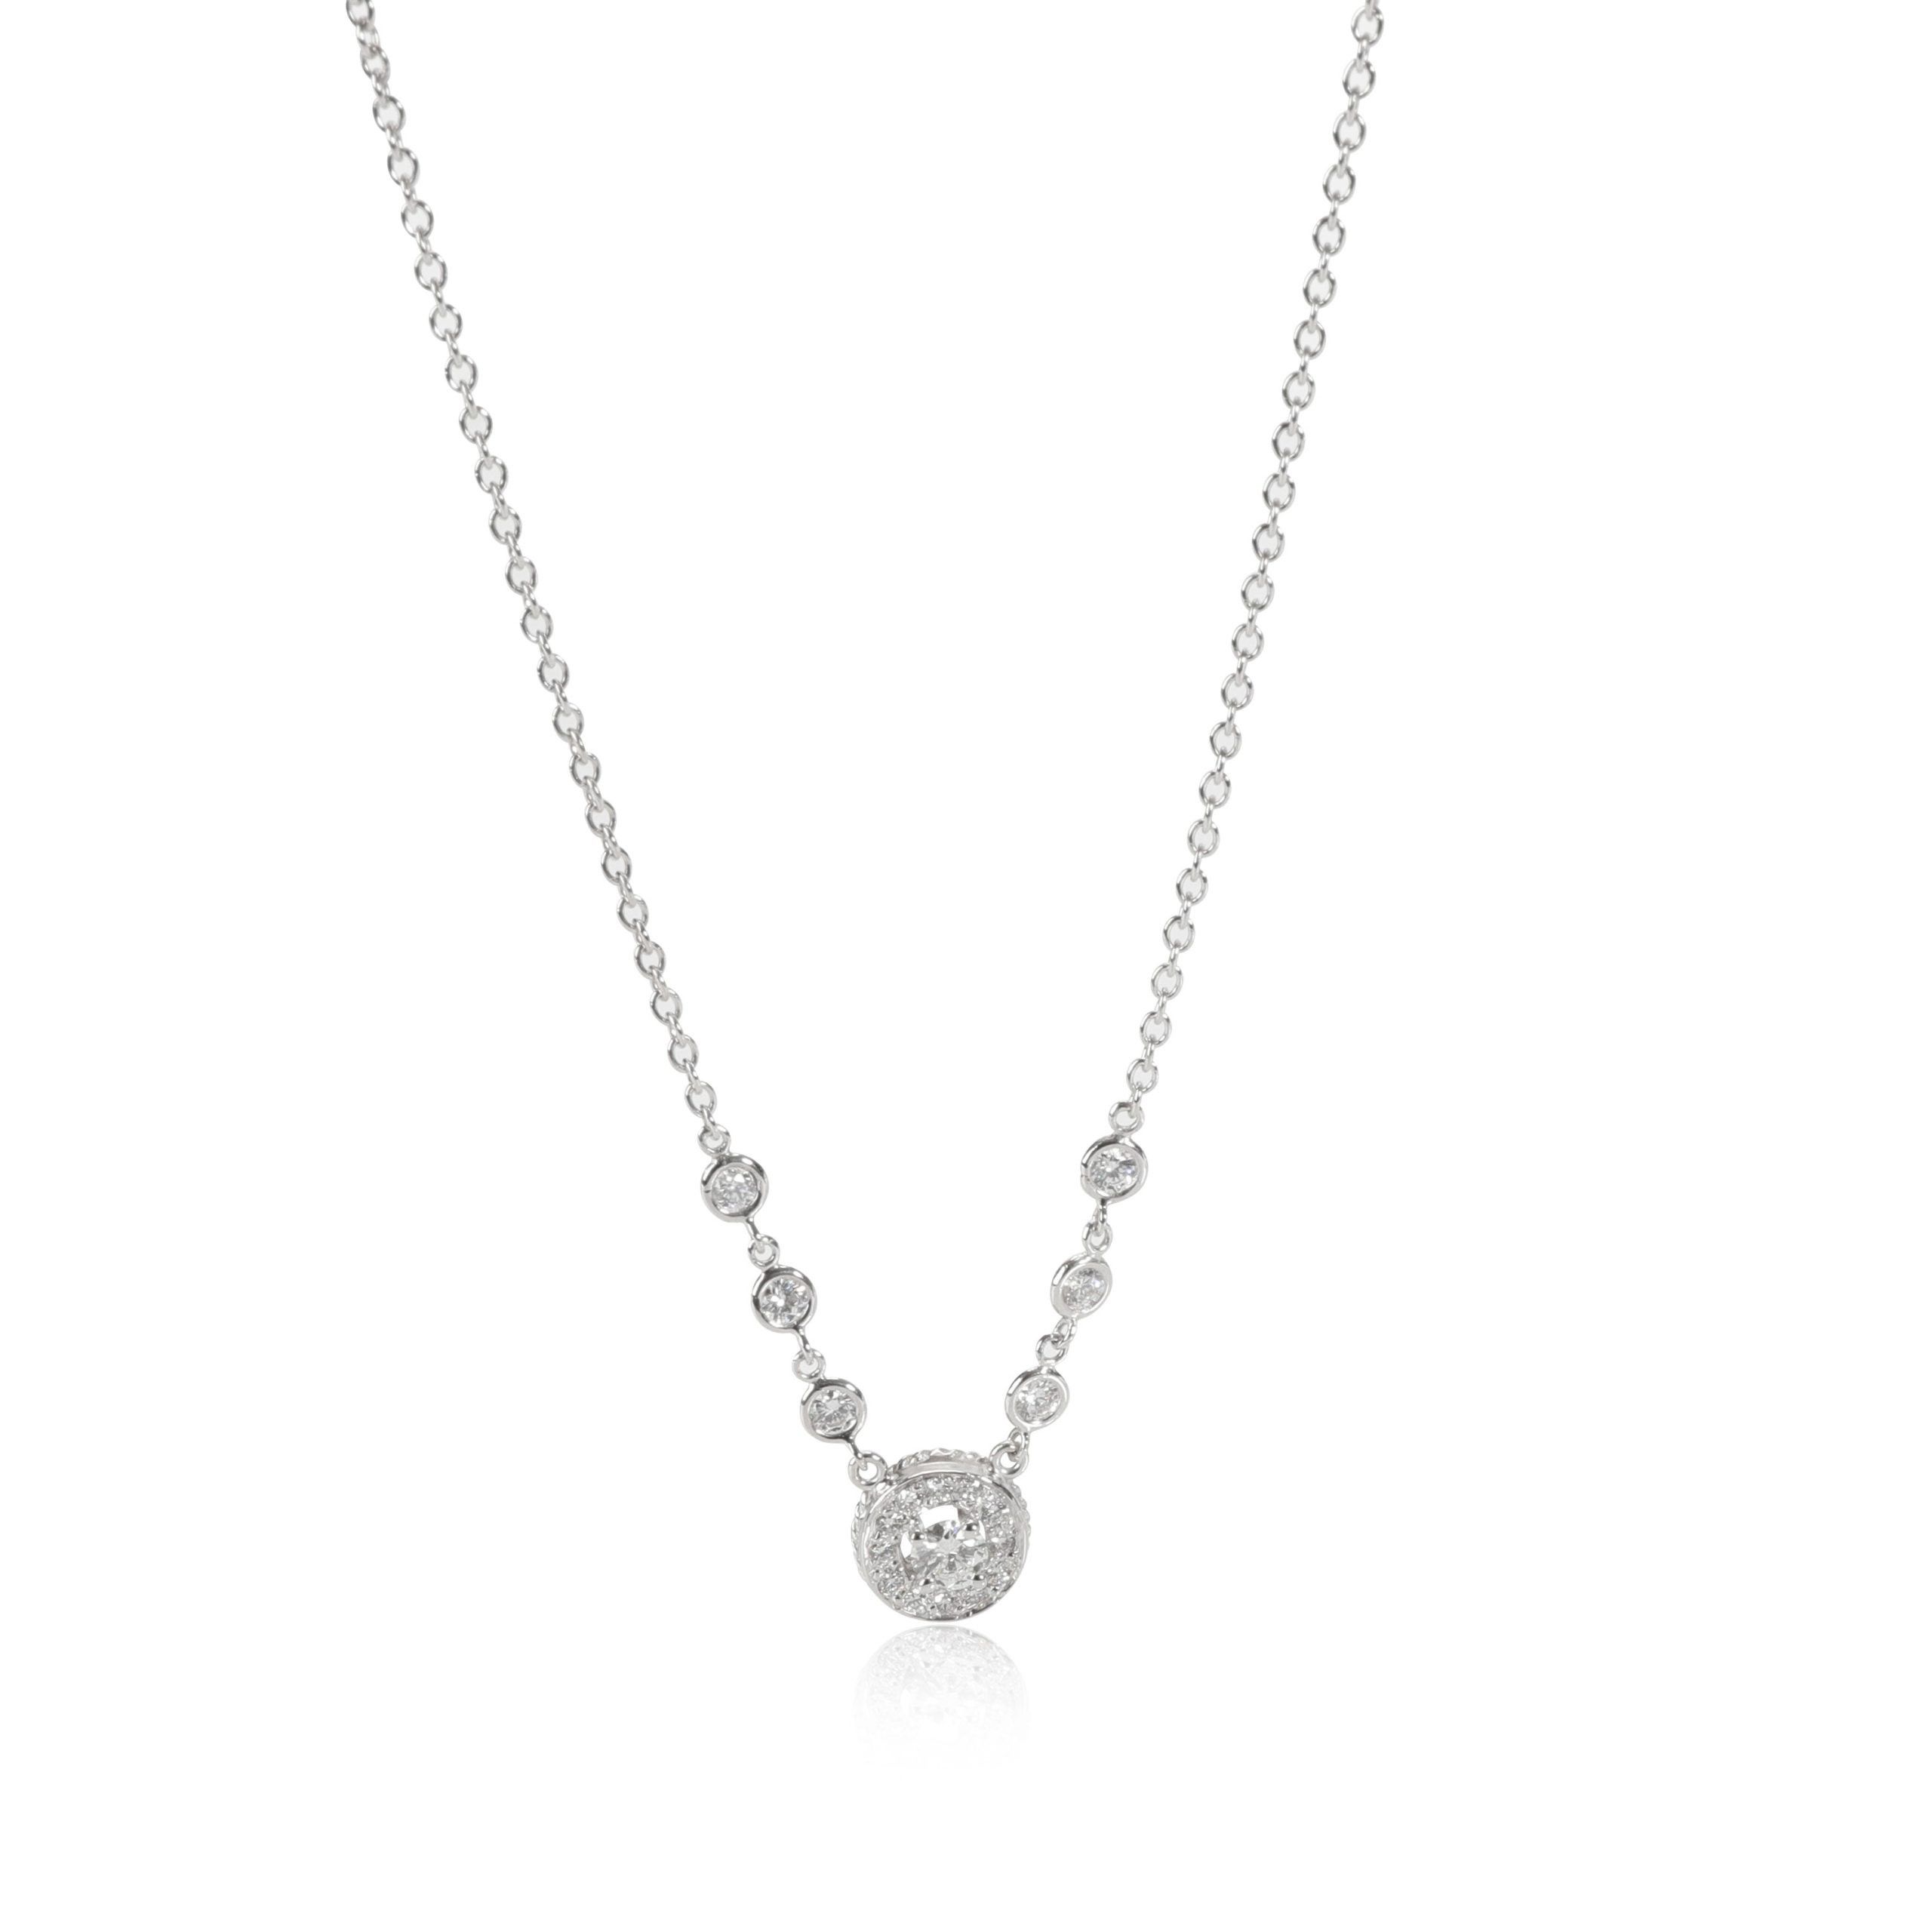 Halo Halo Diamond Necklace in 18K White Gold 0.67 CTW Size ONE SIZE - 1 Preview